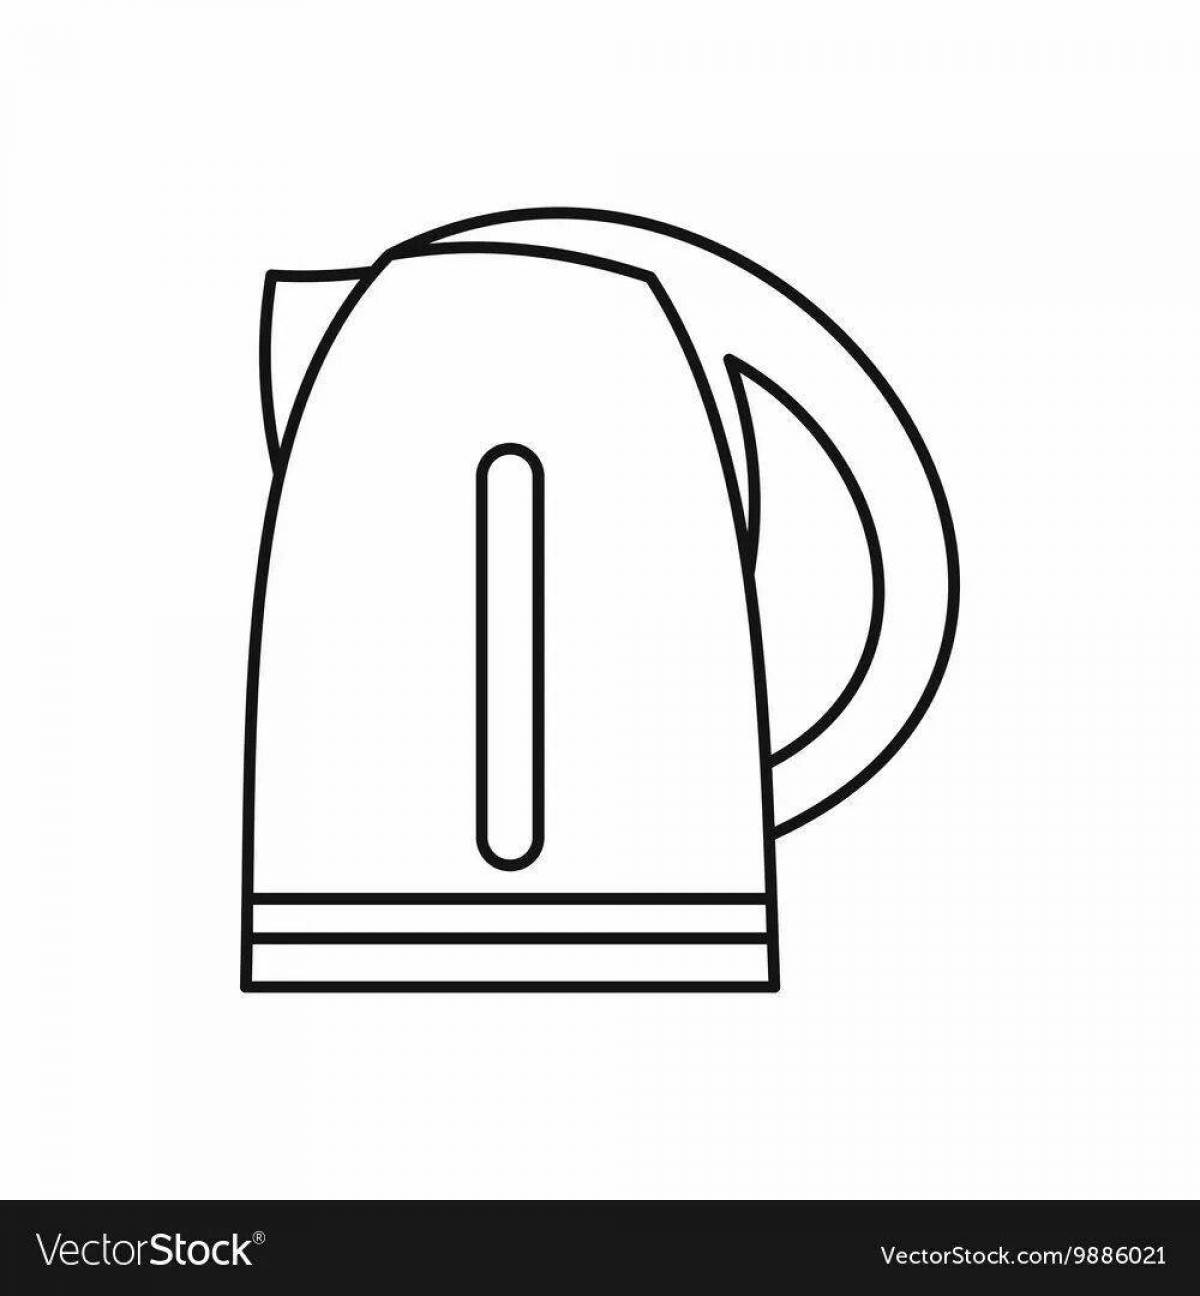 Fun coloring electric kettle for kids